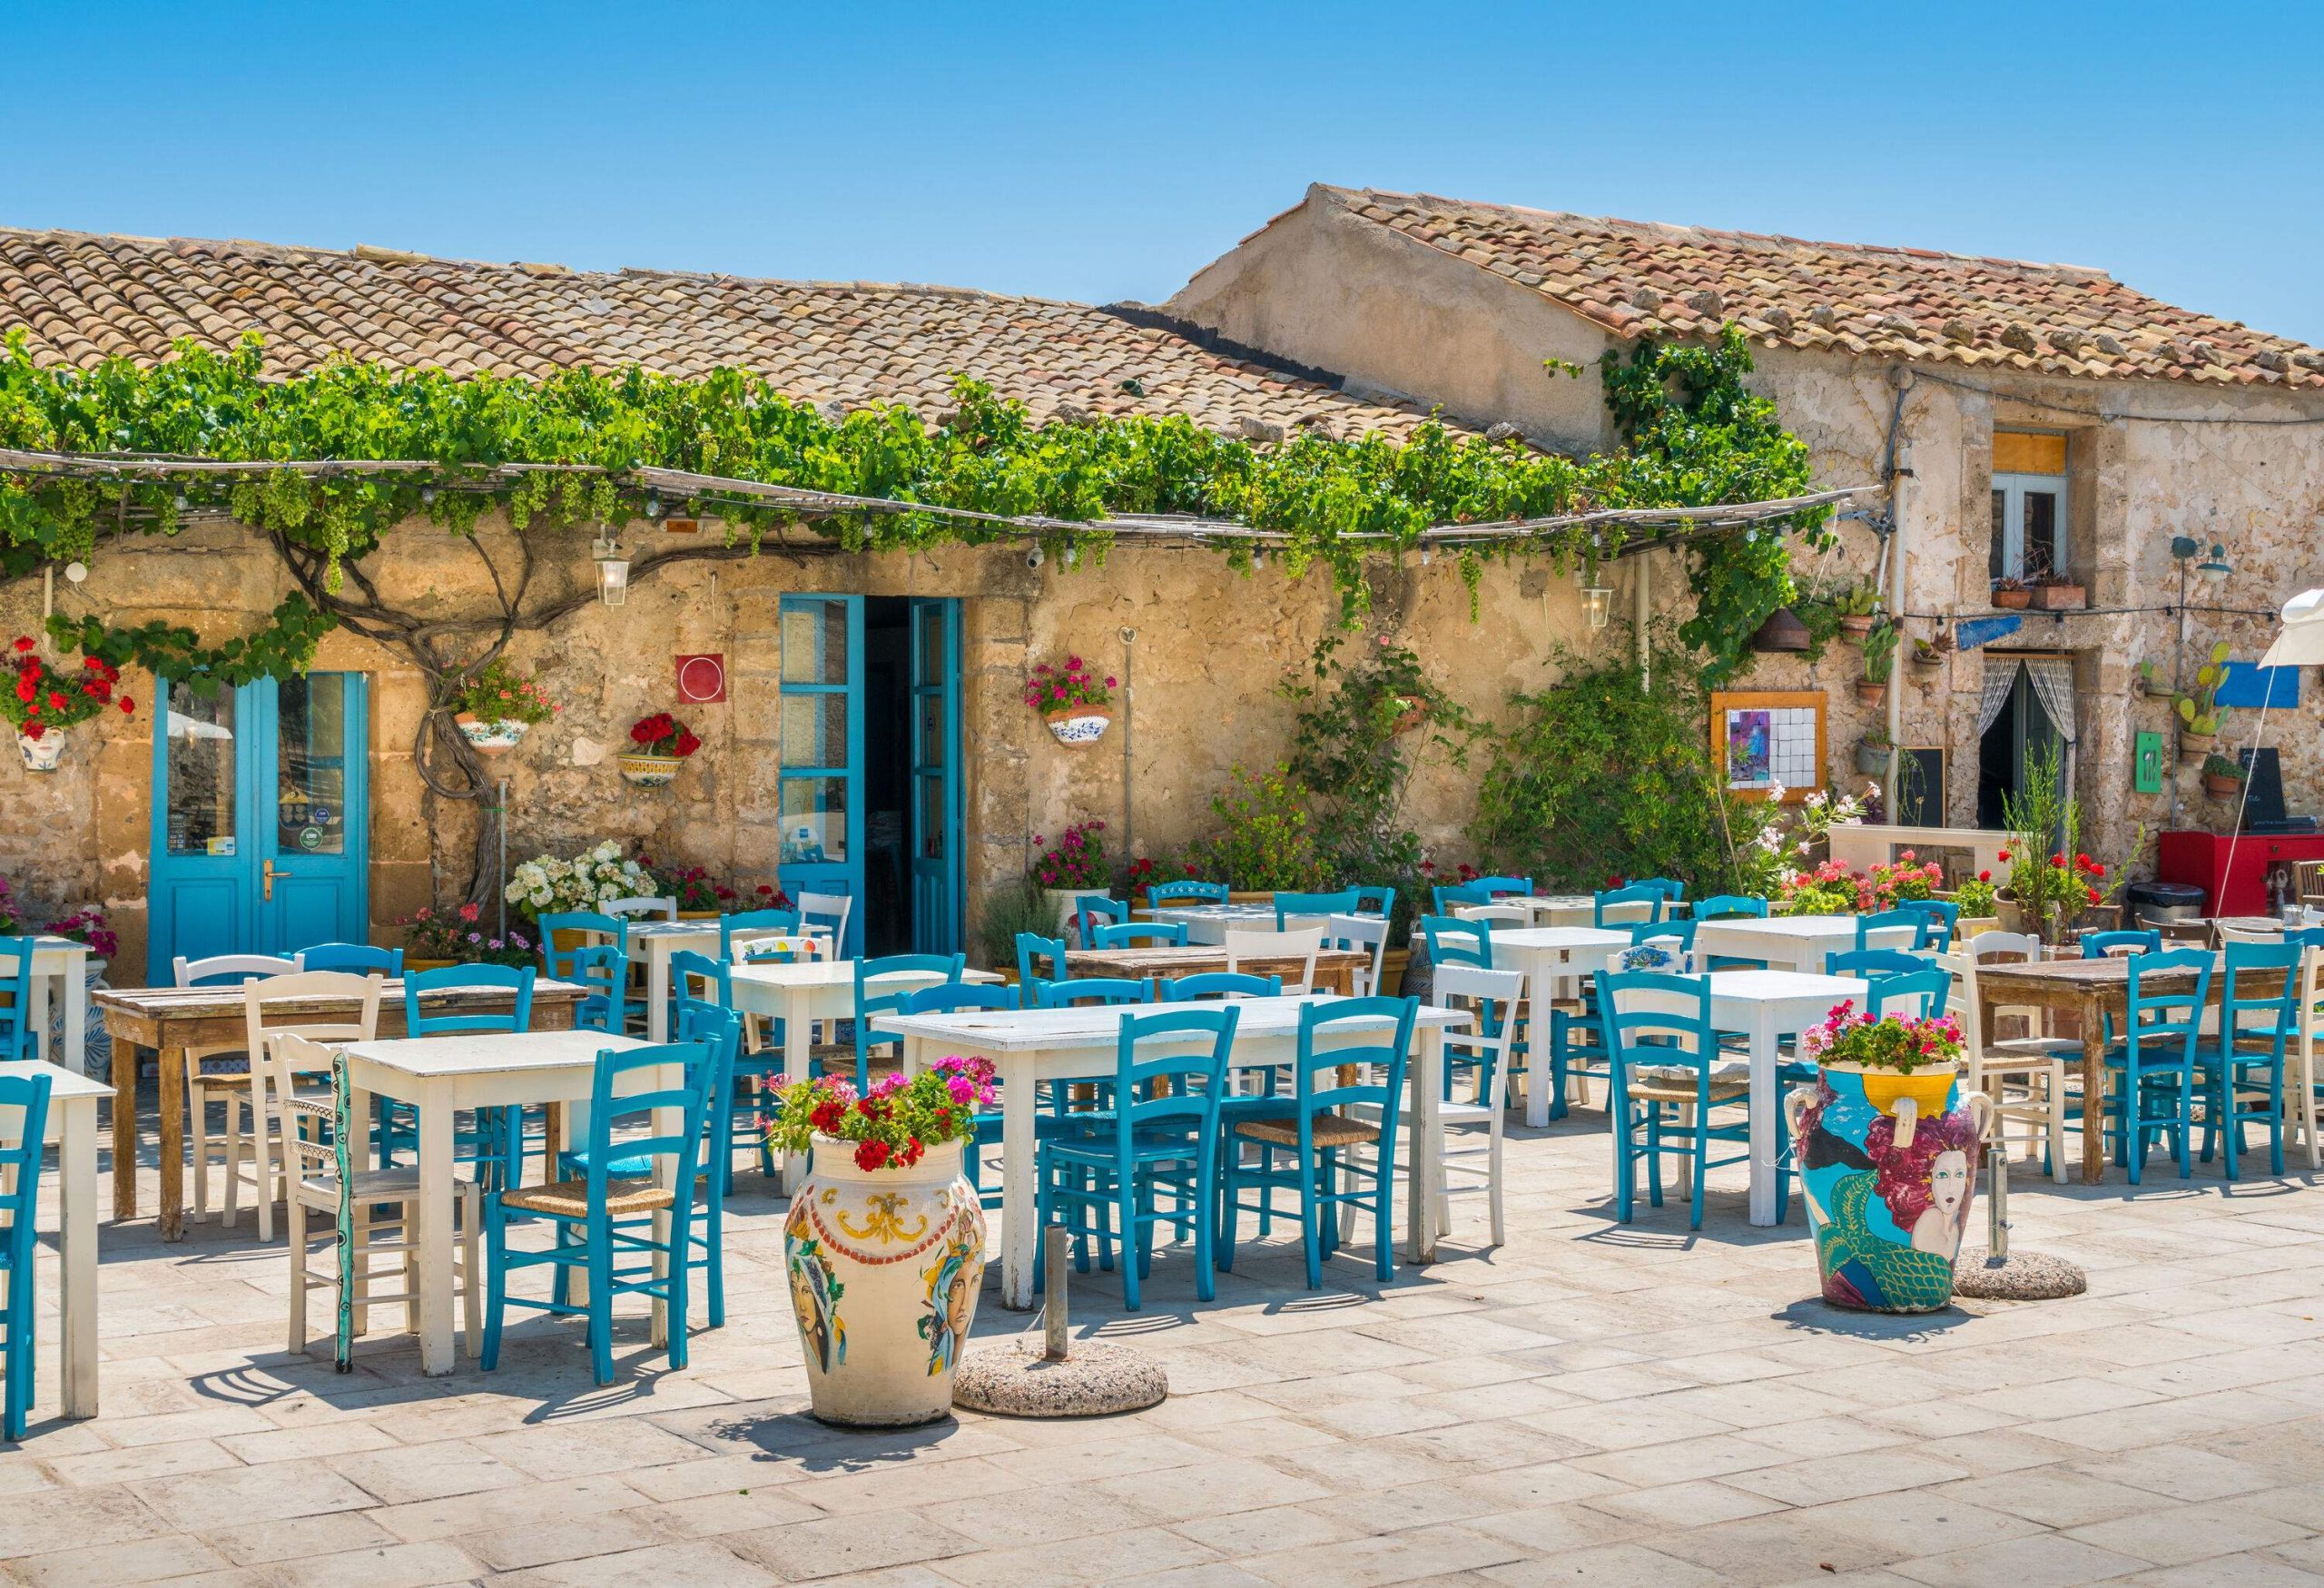 Wooden chairs and tables are set up for al fresco dining outside a charming stone house with a tiled roof, surrounded by lush greenery and a peaceful ambiance.